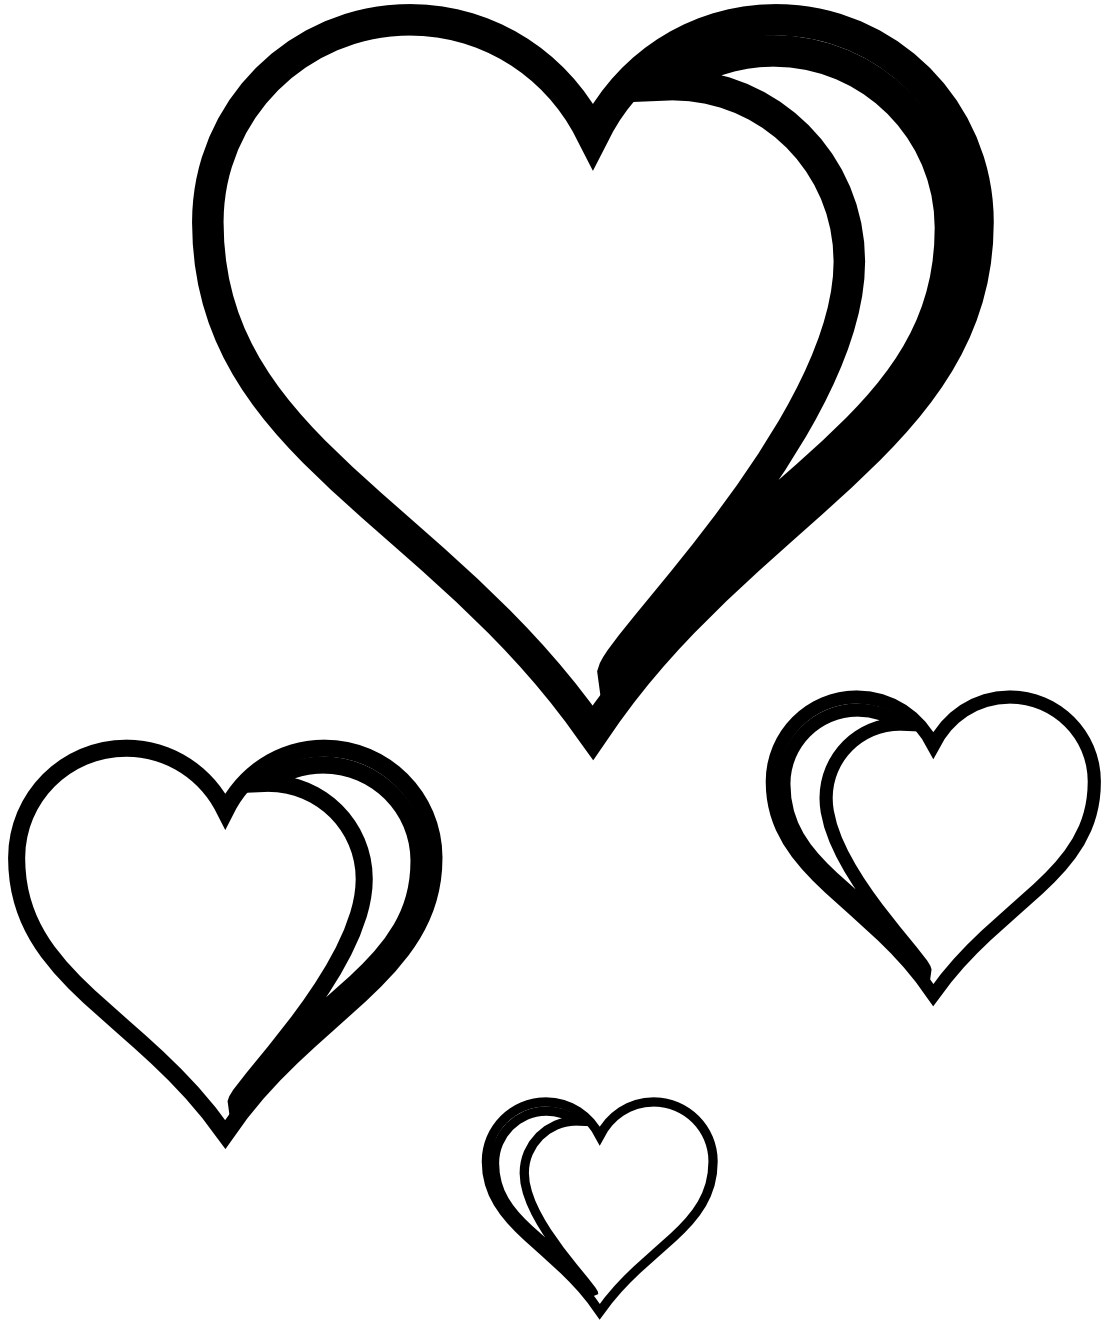 Clipart Heart Black And White Clipart Panda Free Clipart Images